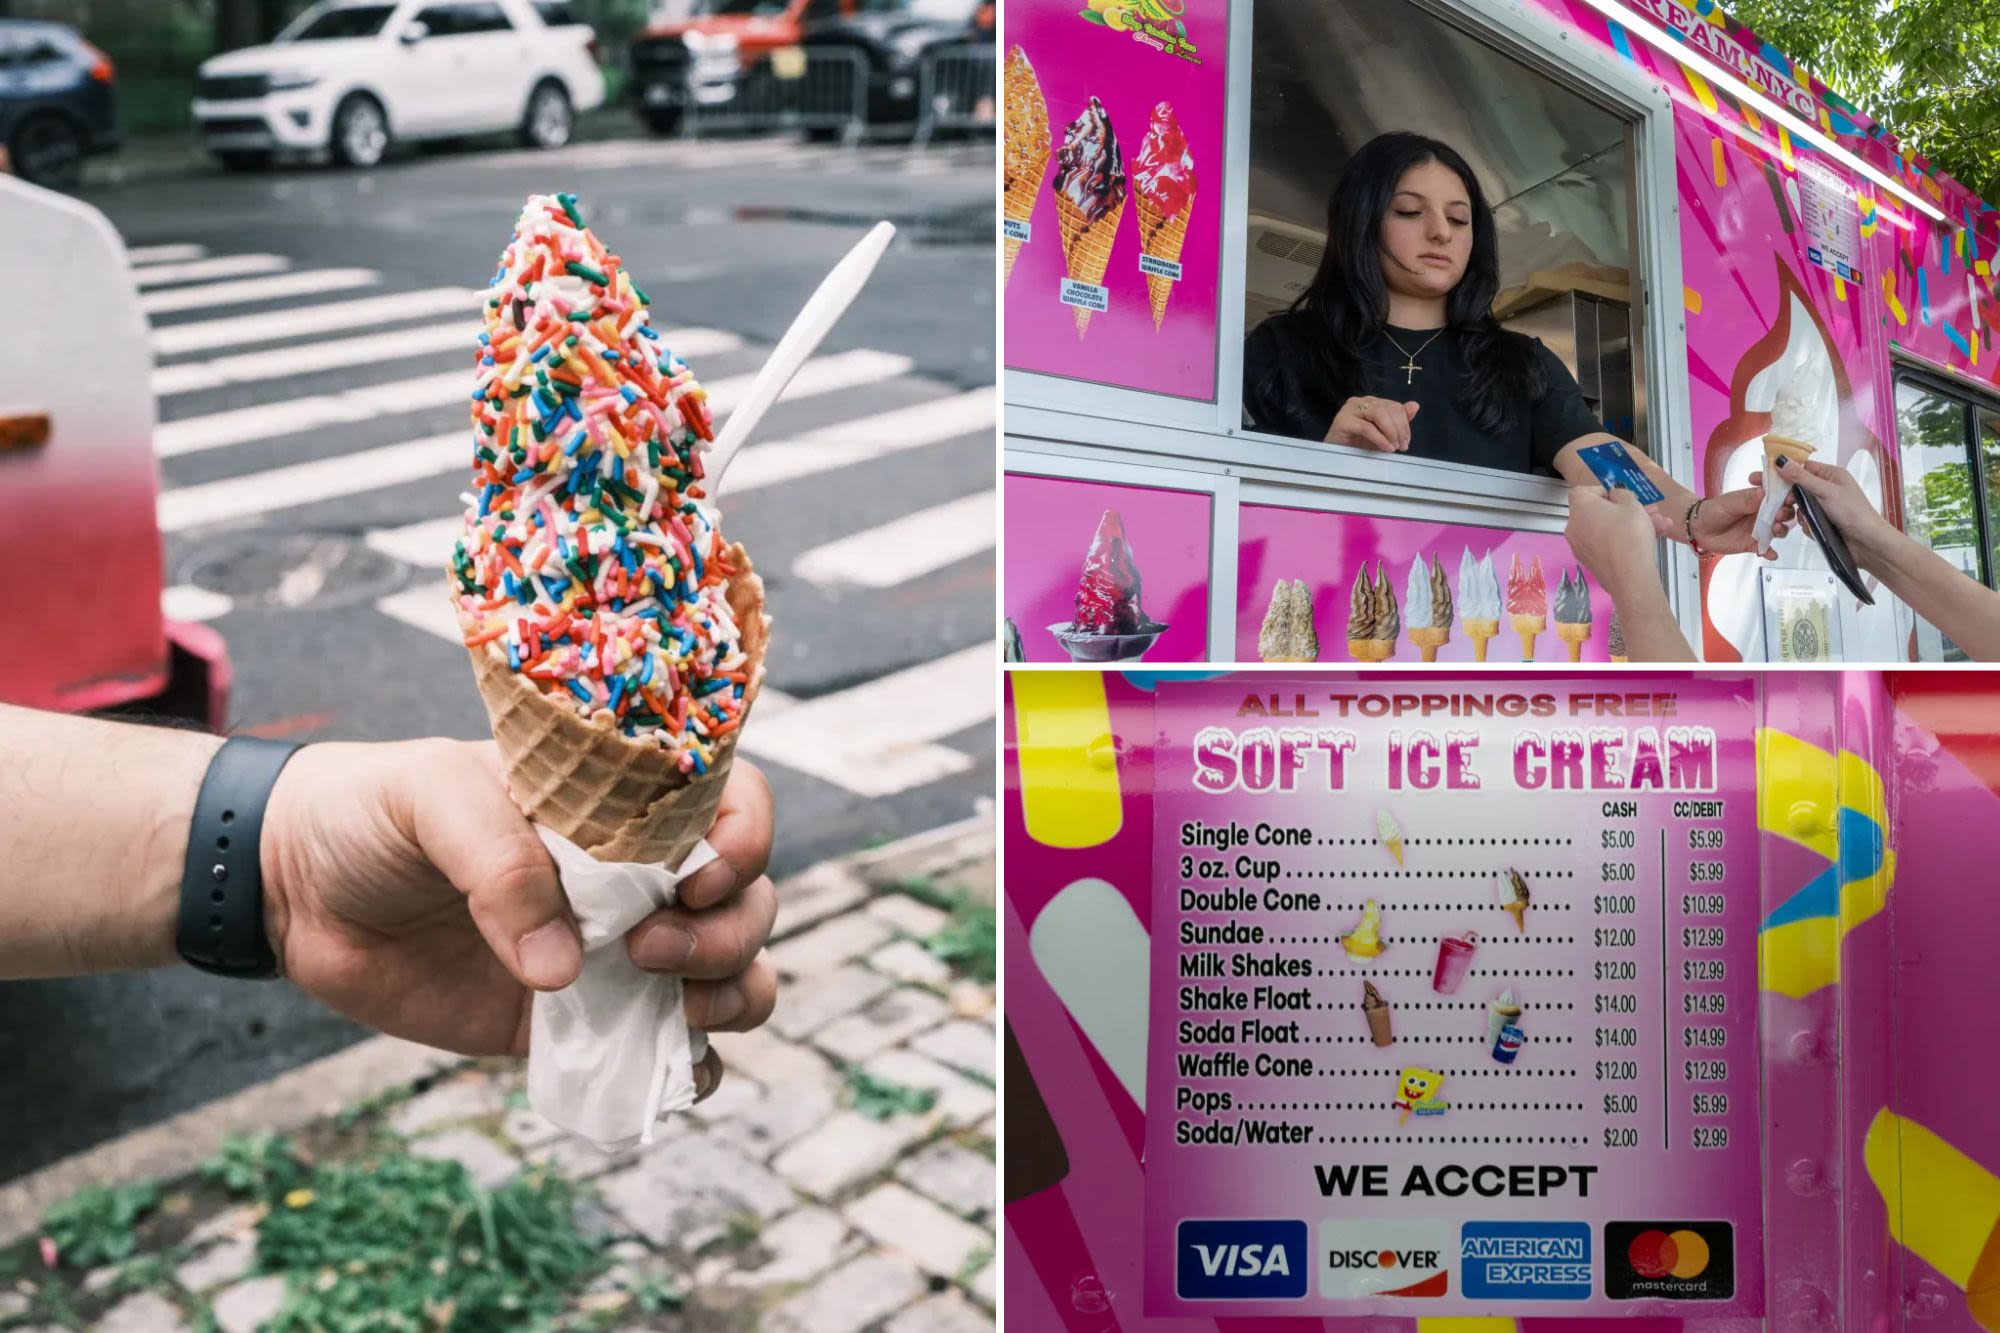 NYC parents having meltdown over $14 ice cream cones: ‘It’s out of control’